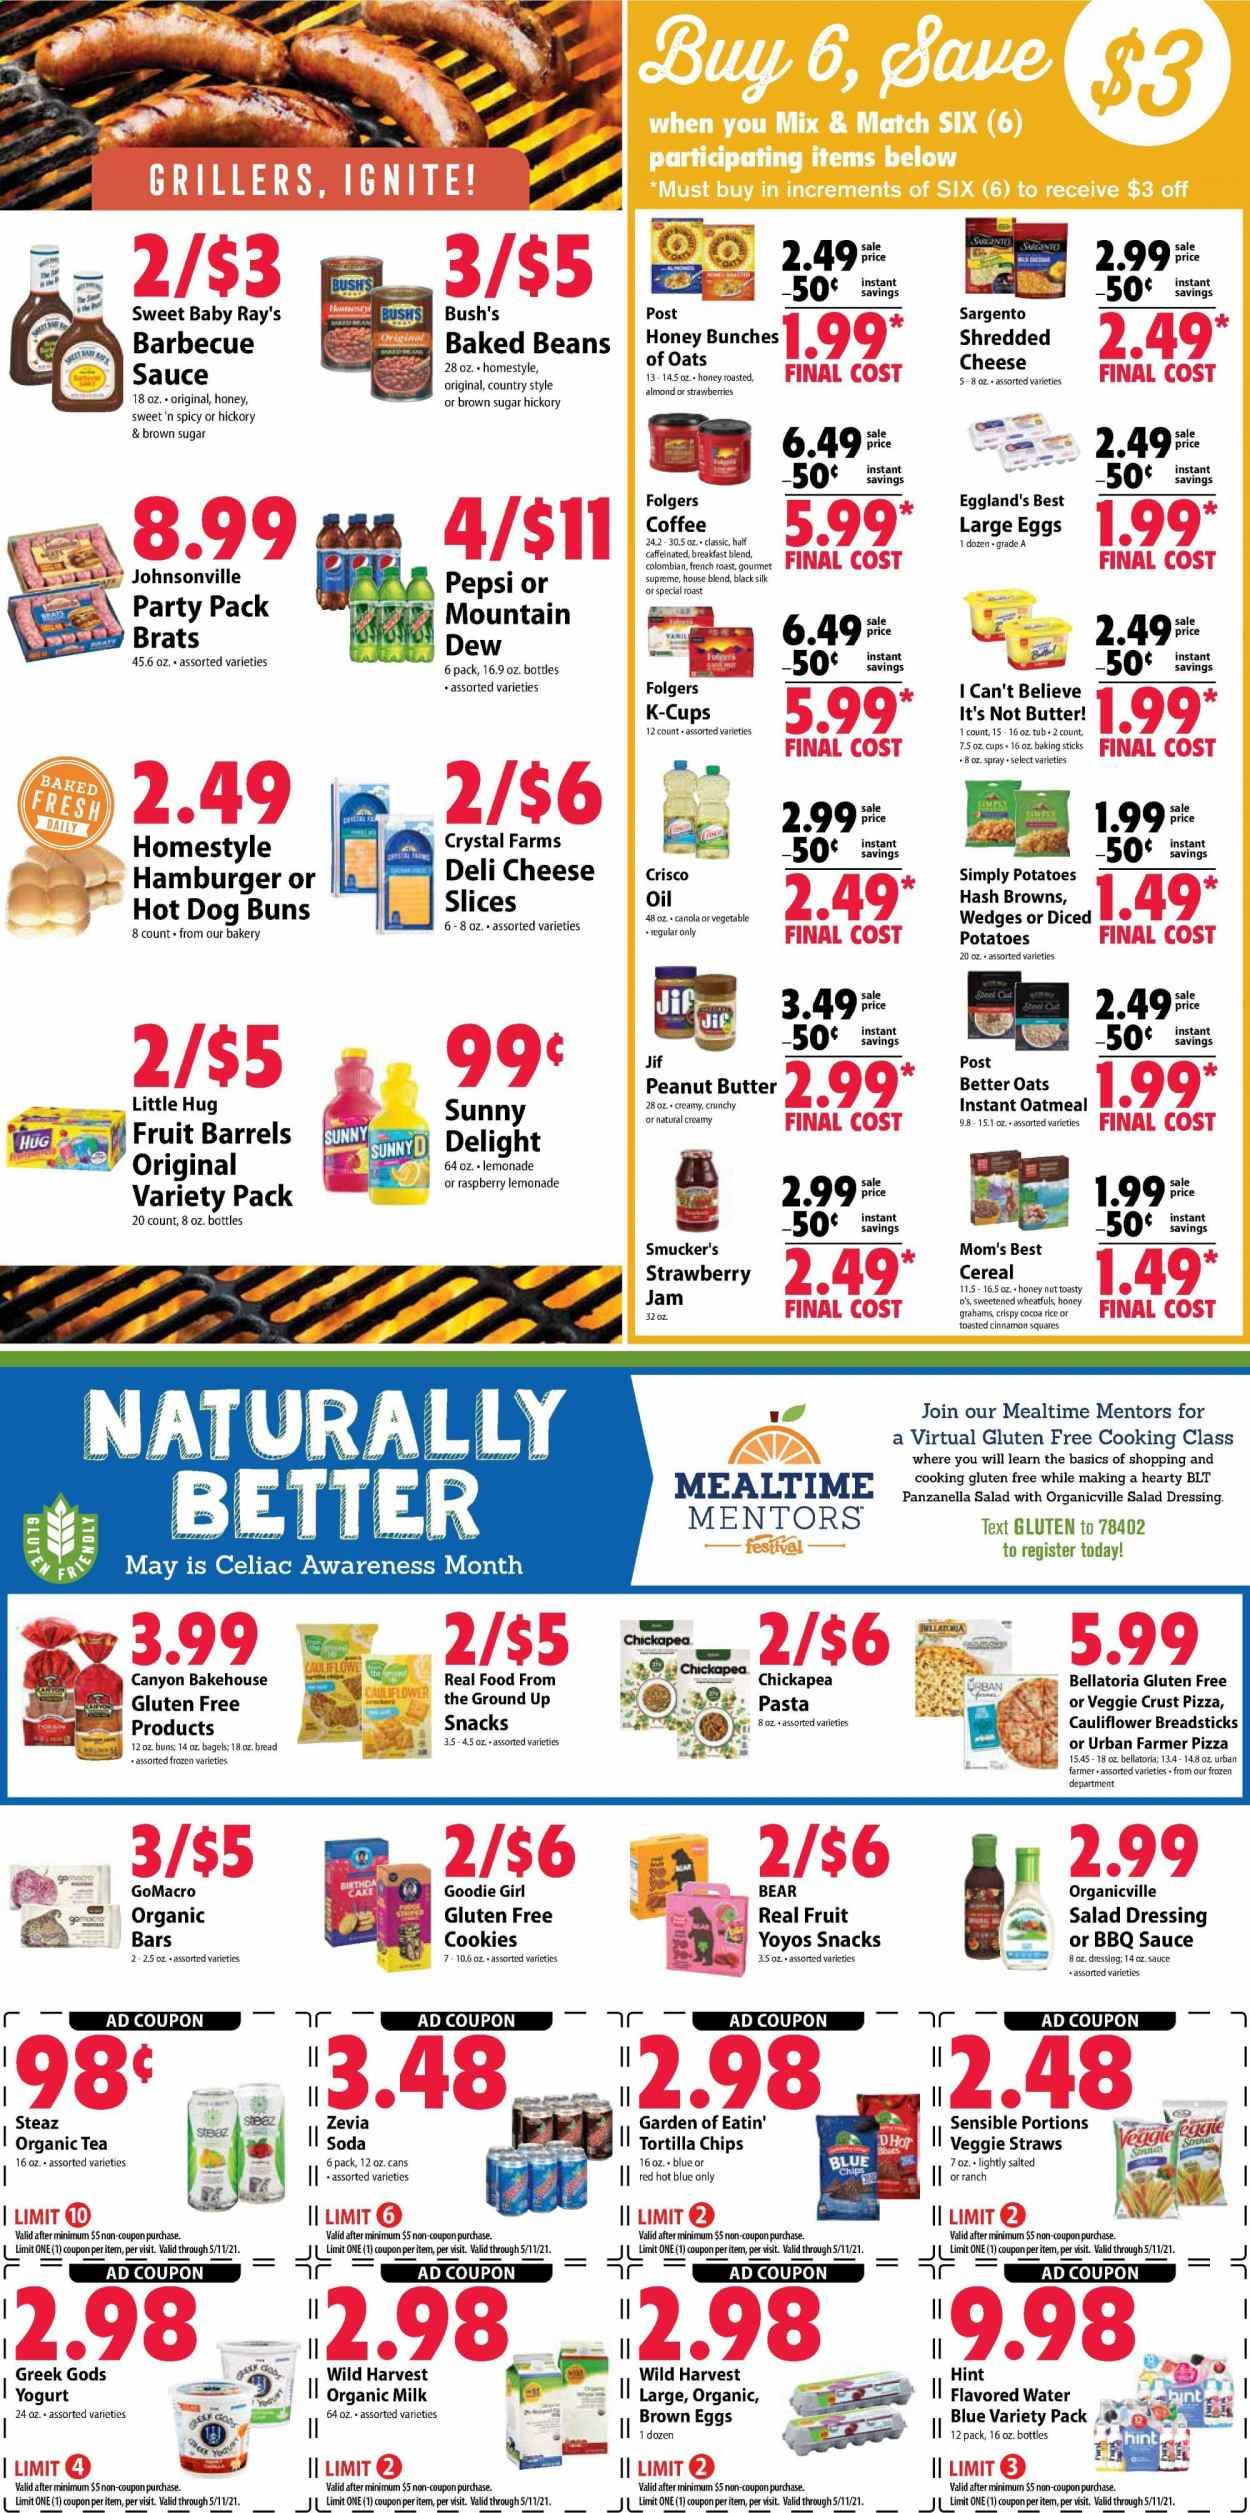 Festival Foods (WI) Weekly Ad Flyer May 5 to May 11